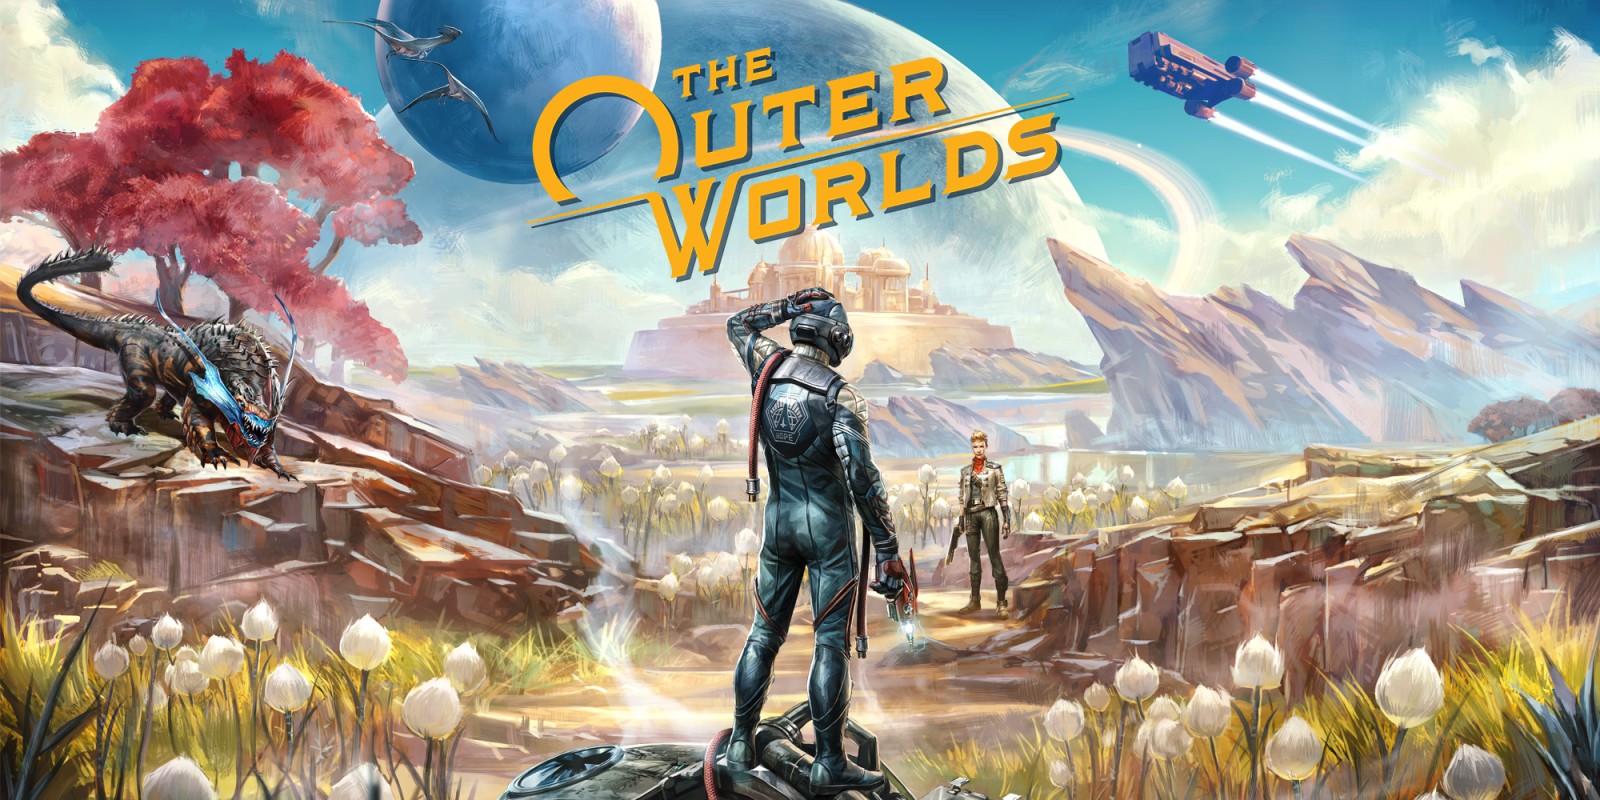 The Outer Worlds releasing on Nintendo Switch on June 5